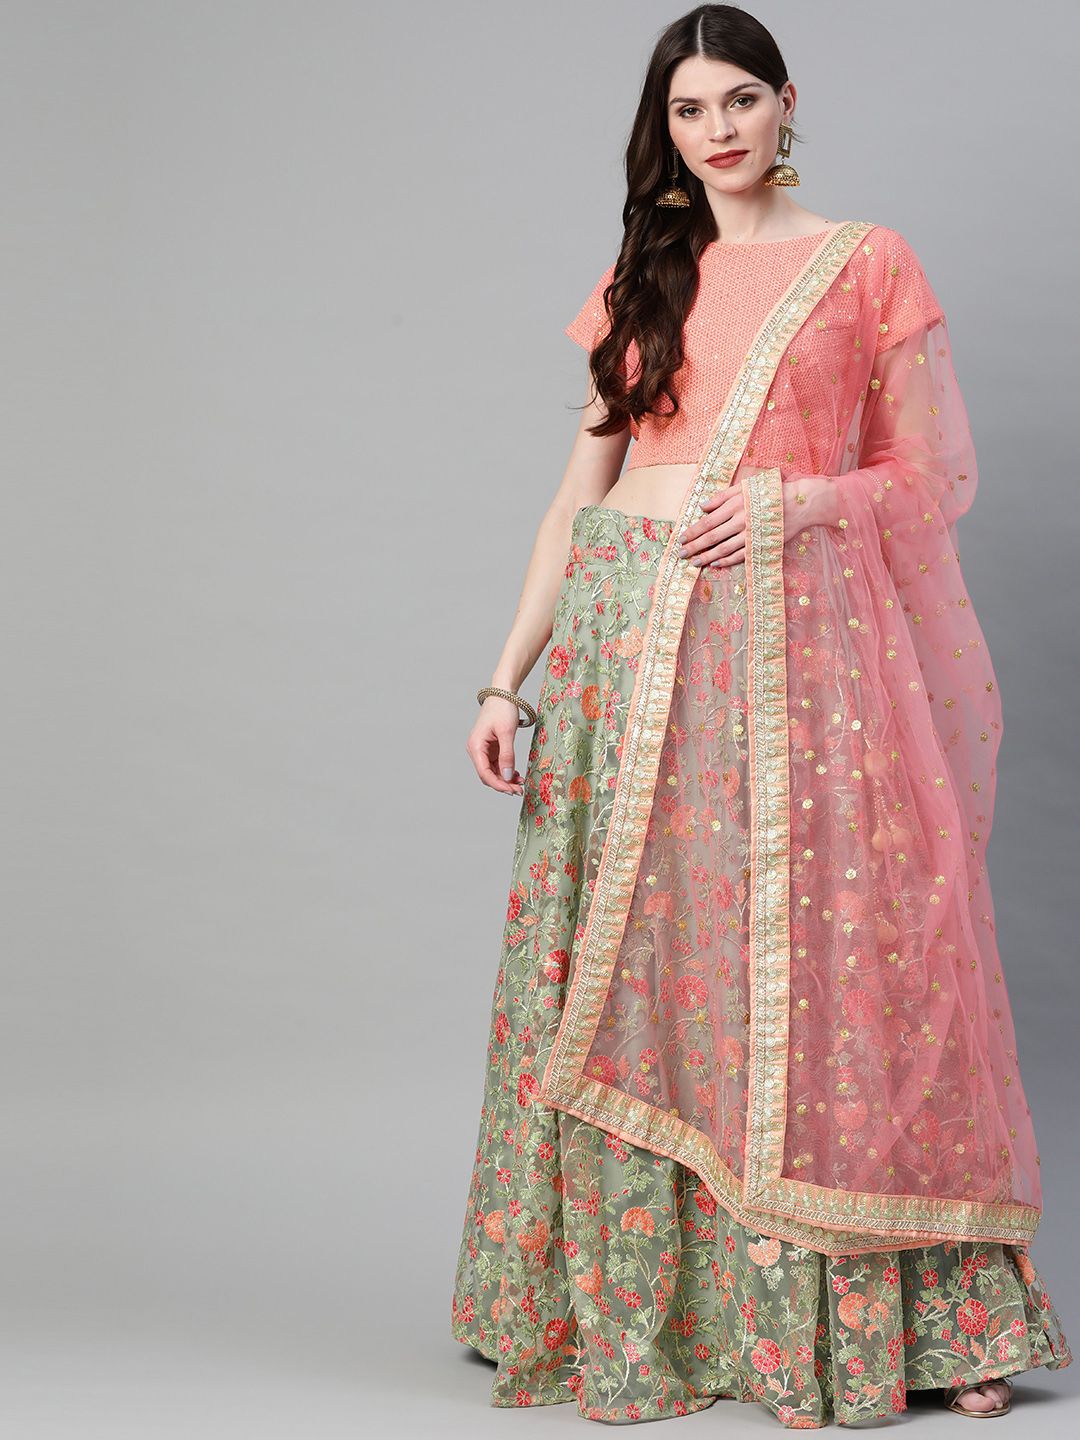 Readiprint Fashions Green & Peach Semi-Stitched Lehenga & Unstitched Blouse with Dupatta Price in India